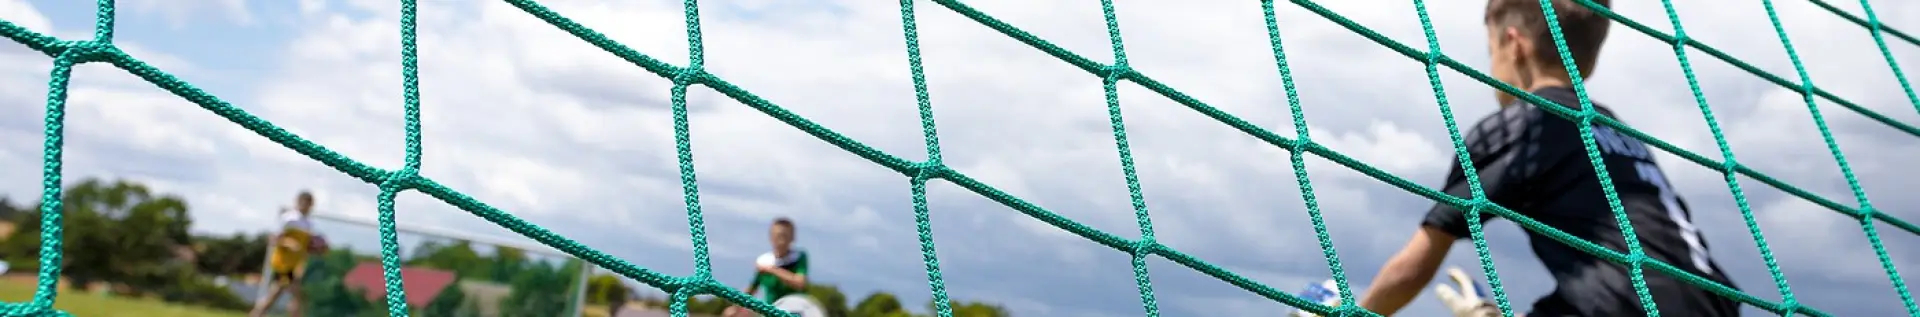 Fence net for volleyball courts - Cod. PVRE0301N